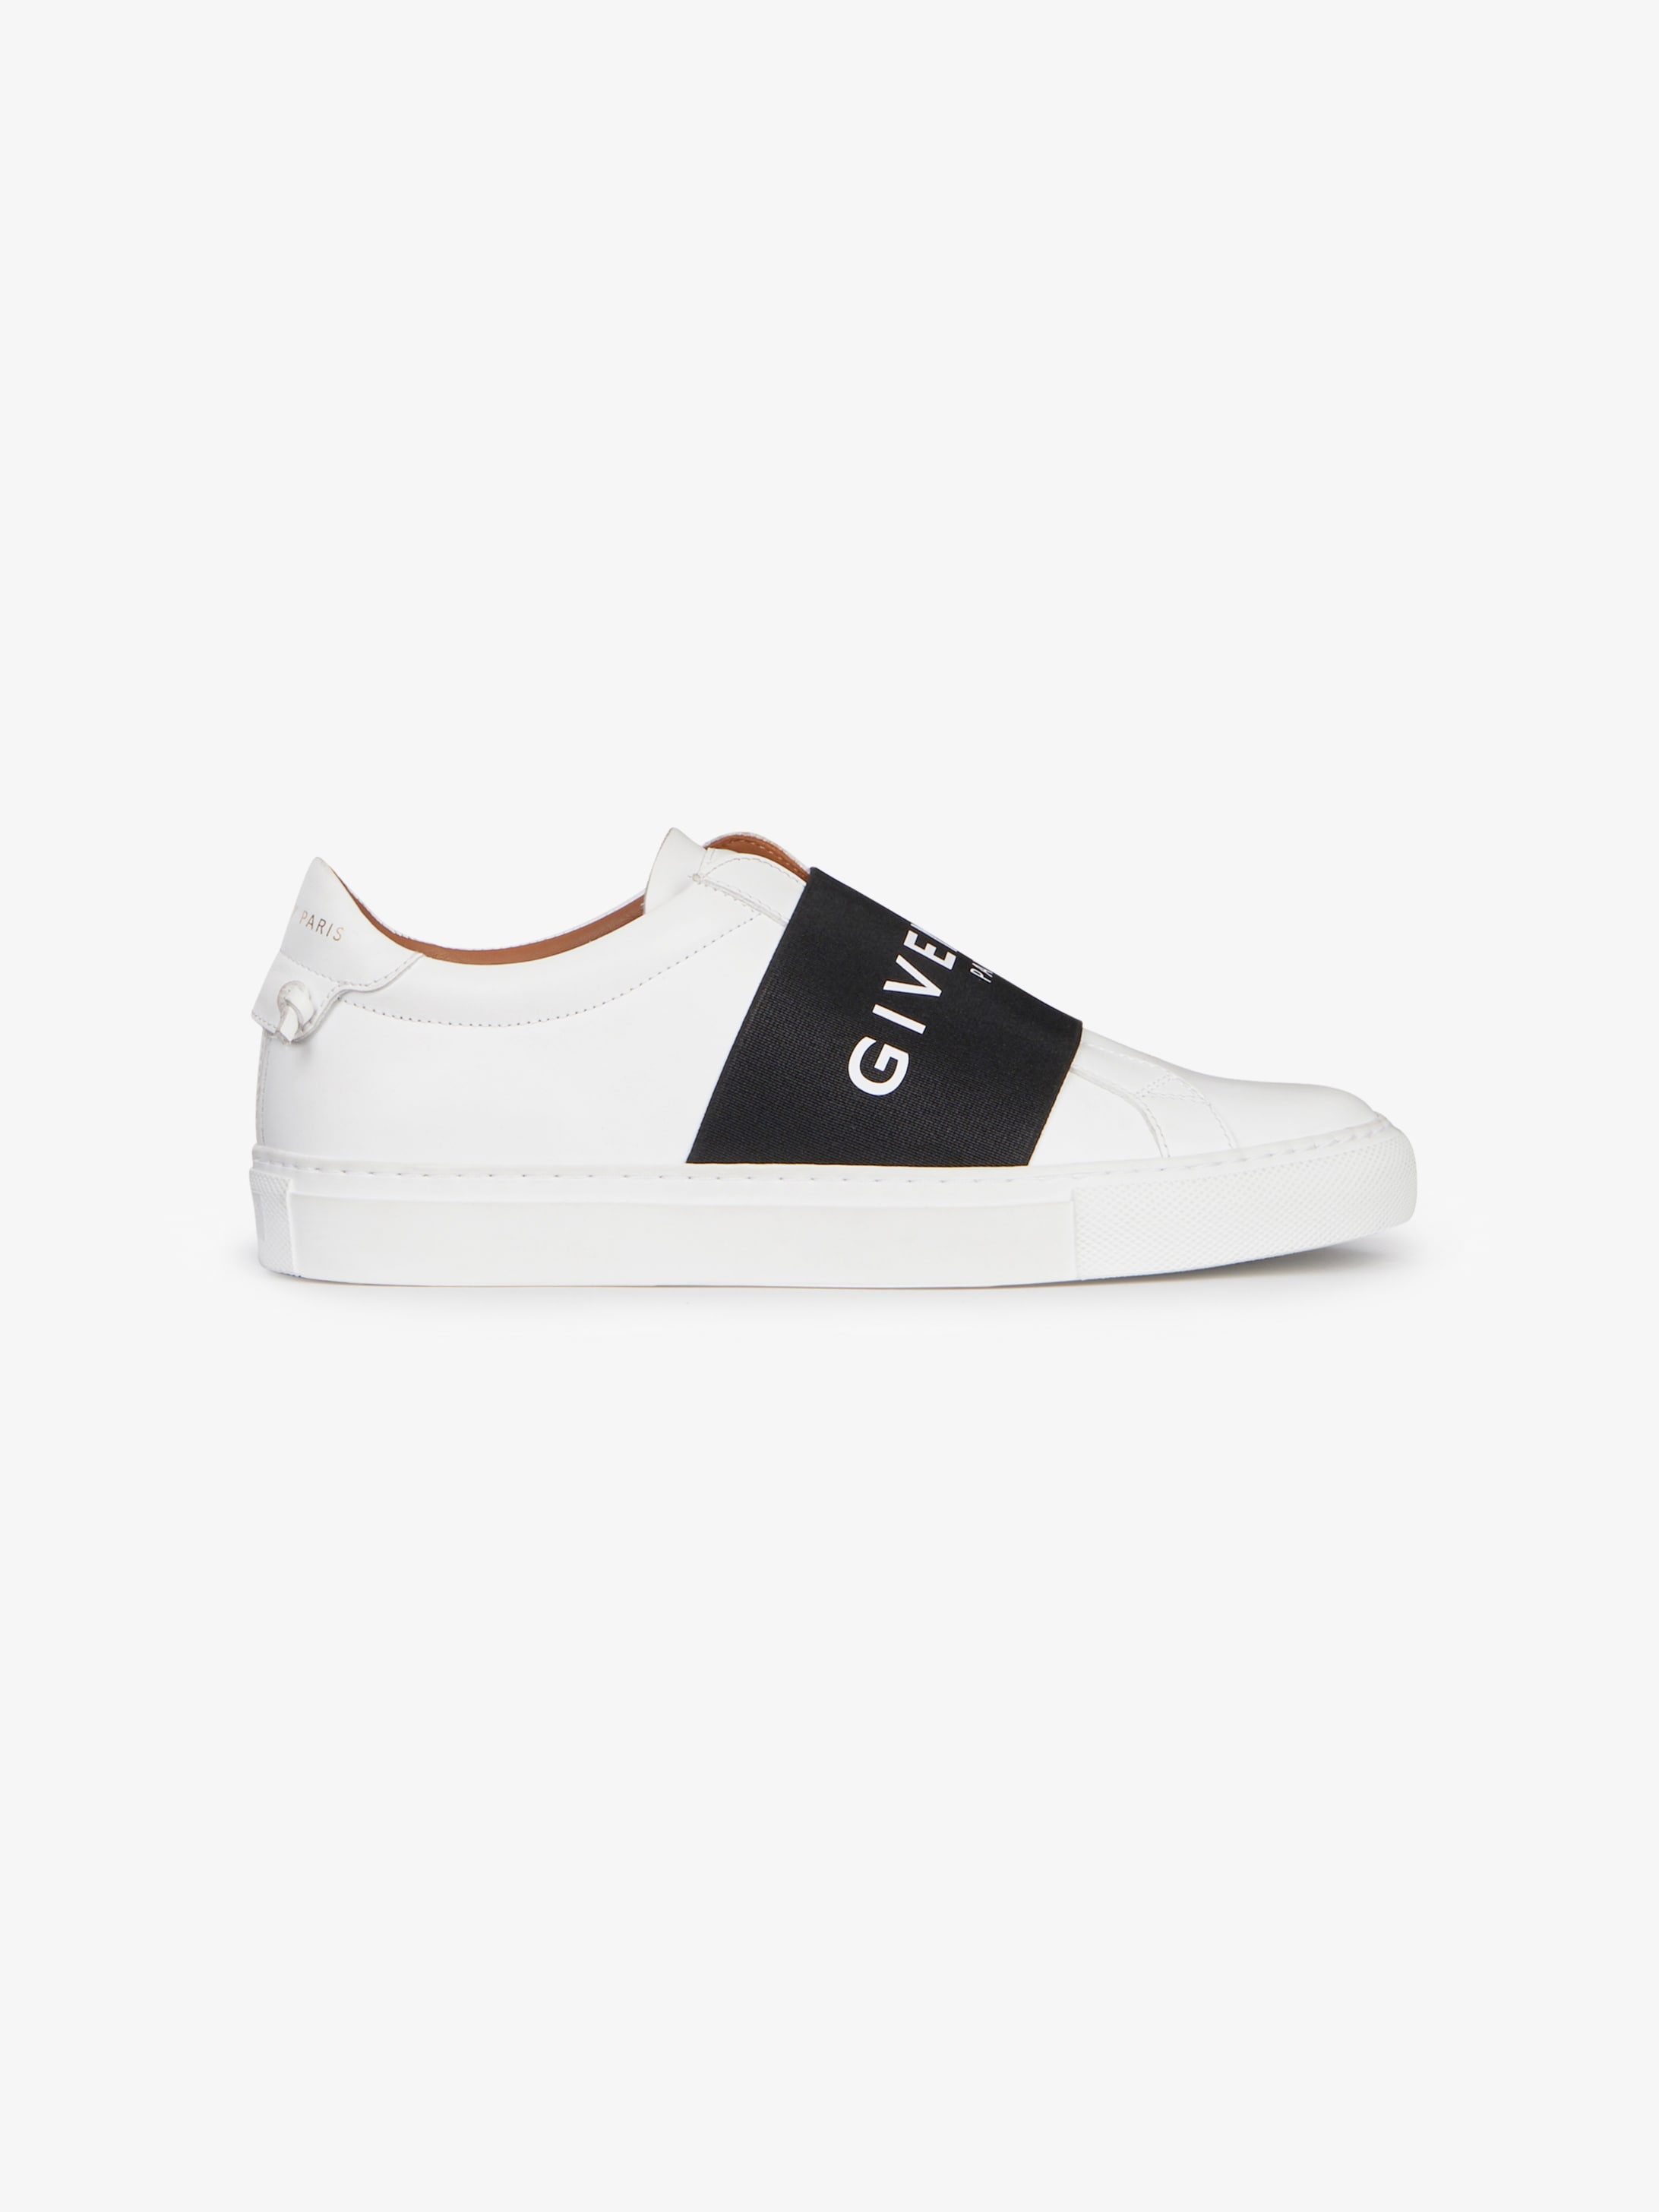 givenchy sneaker sizing